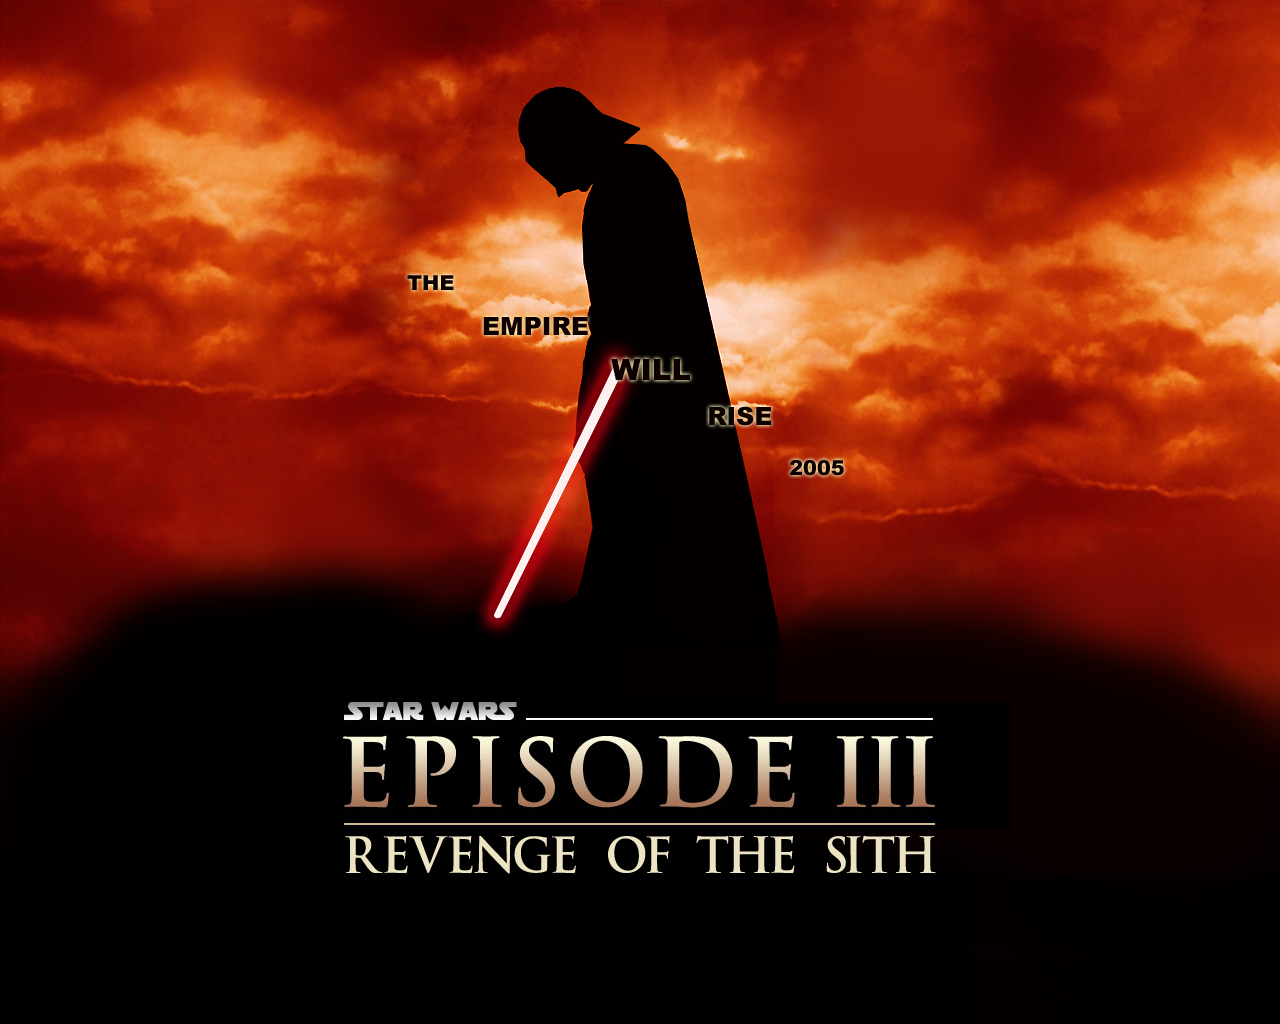 Star Wars Episode III: Revenge of the Sith Picture